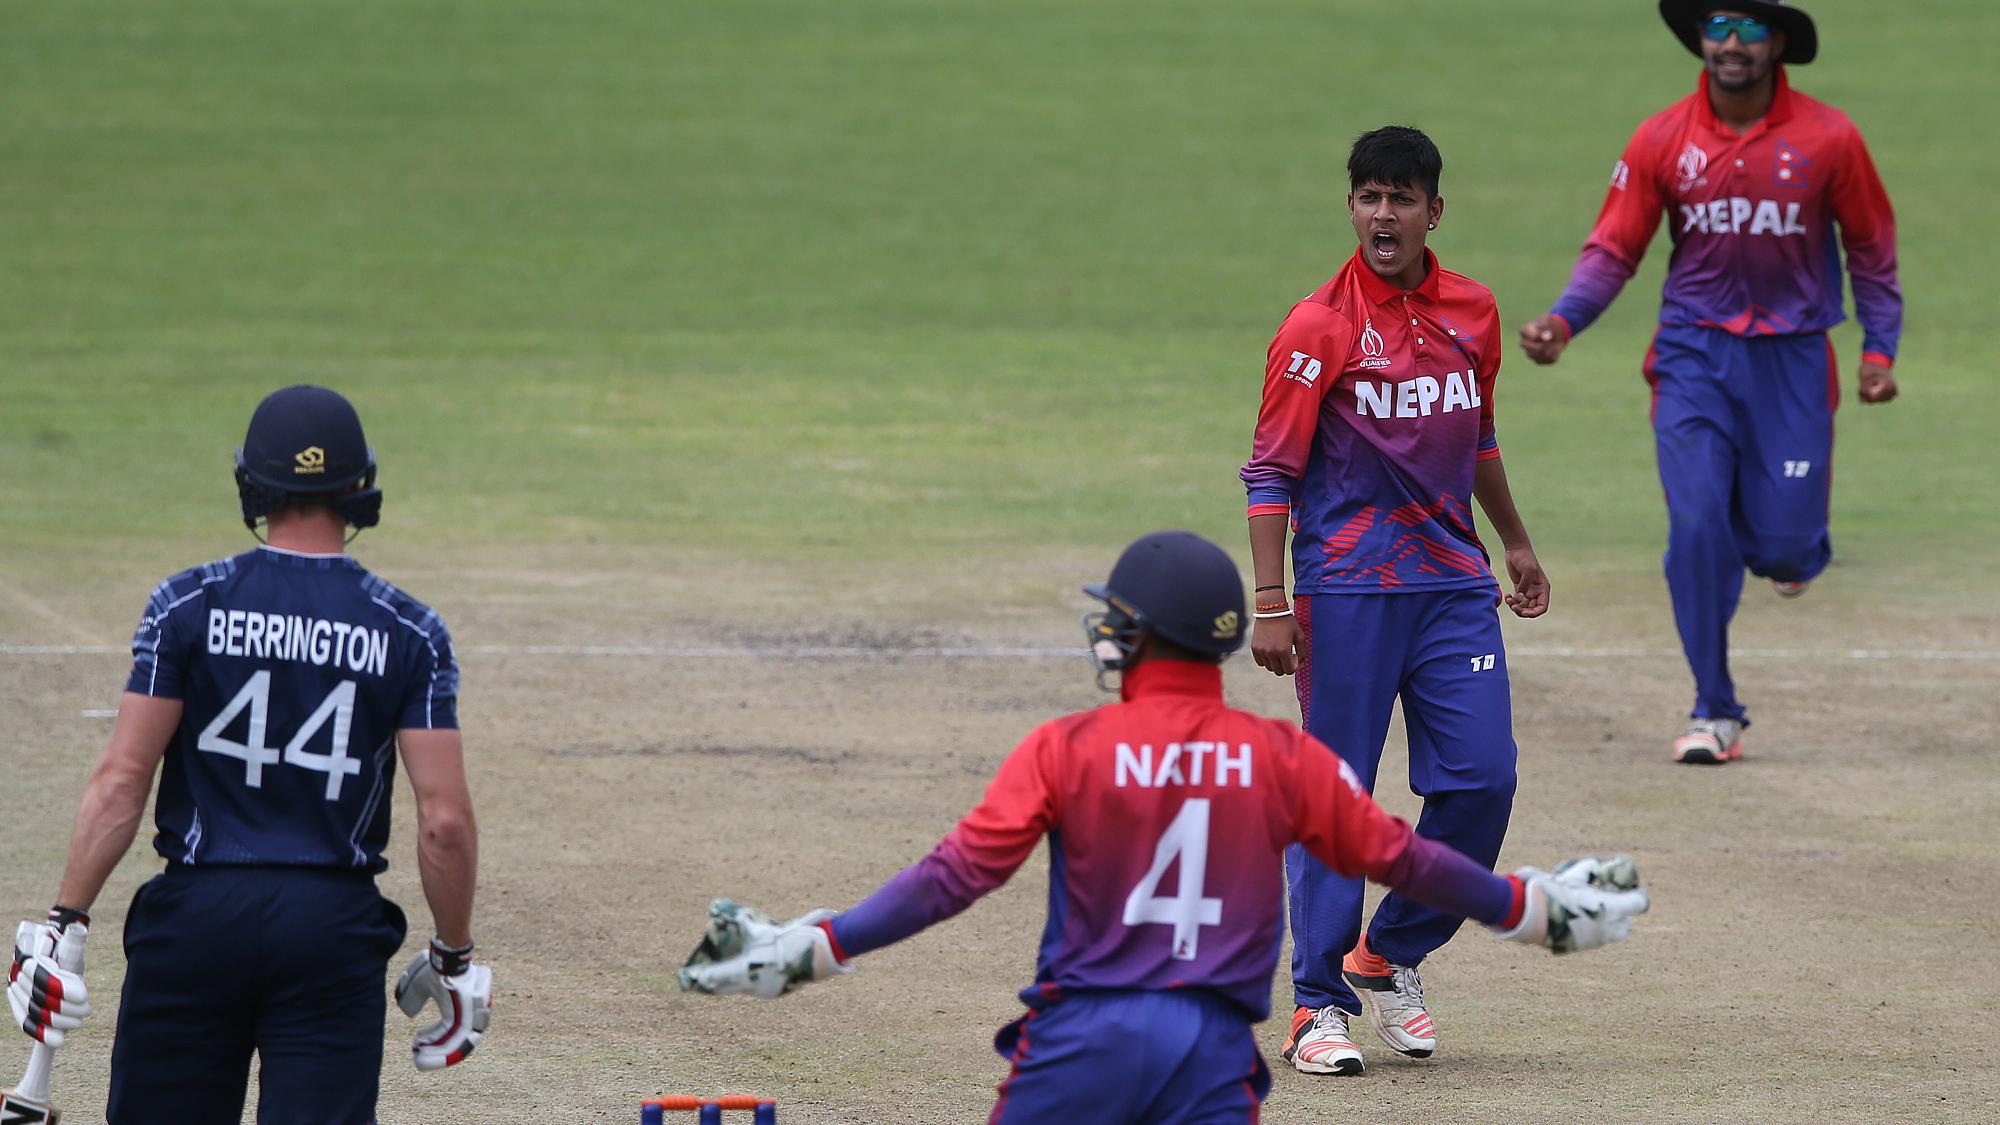 ICC WC League 2: Nepal clinches triangular series with 4 in 4 wins